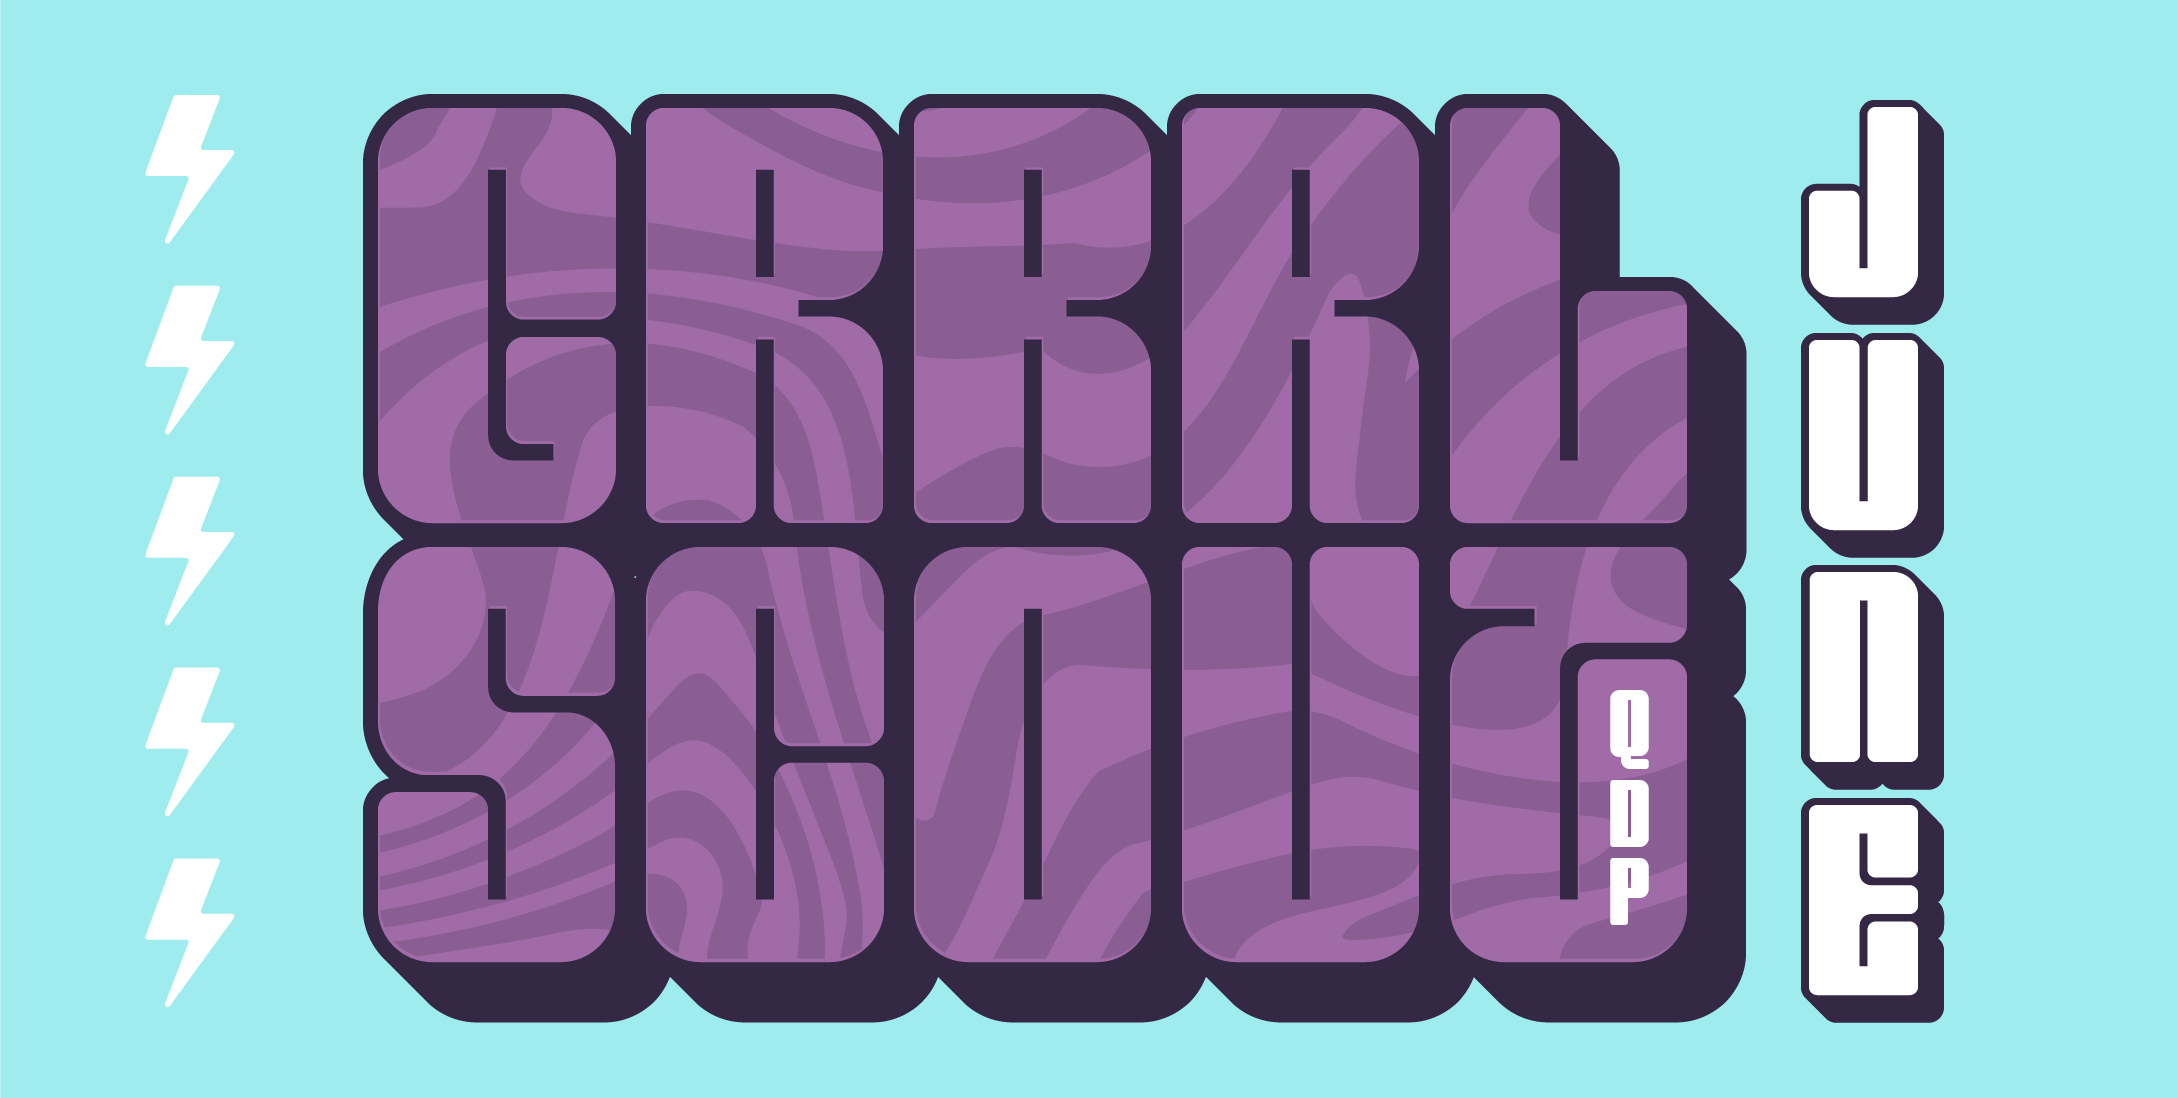 GRRRL SCOUT: June Queer Dance Party Saturday June 10, 2023 Under The Canopy at The Hook and Ladder Theater 9:30 p.m. – 1:00 a.m :: 21+ $10 (+ Fees) Early Bird (Limited Availability) $15 (+ Fees) Advance $20 (+ Fees) Day of Show $30 (Flat) Door (Limited QTY Available) Music: Dj Keezy Mission Room: DJ La Nena Performances by: Coffê